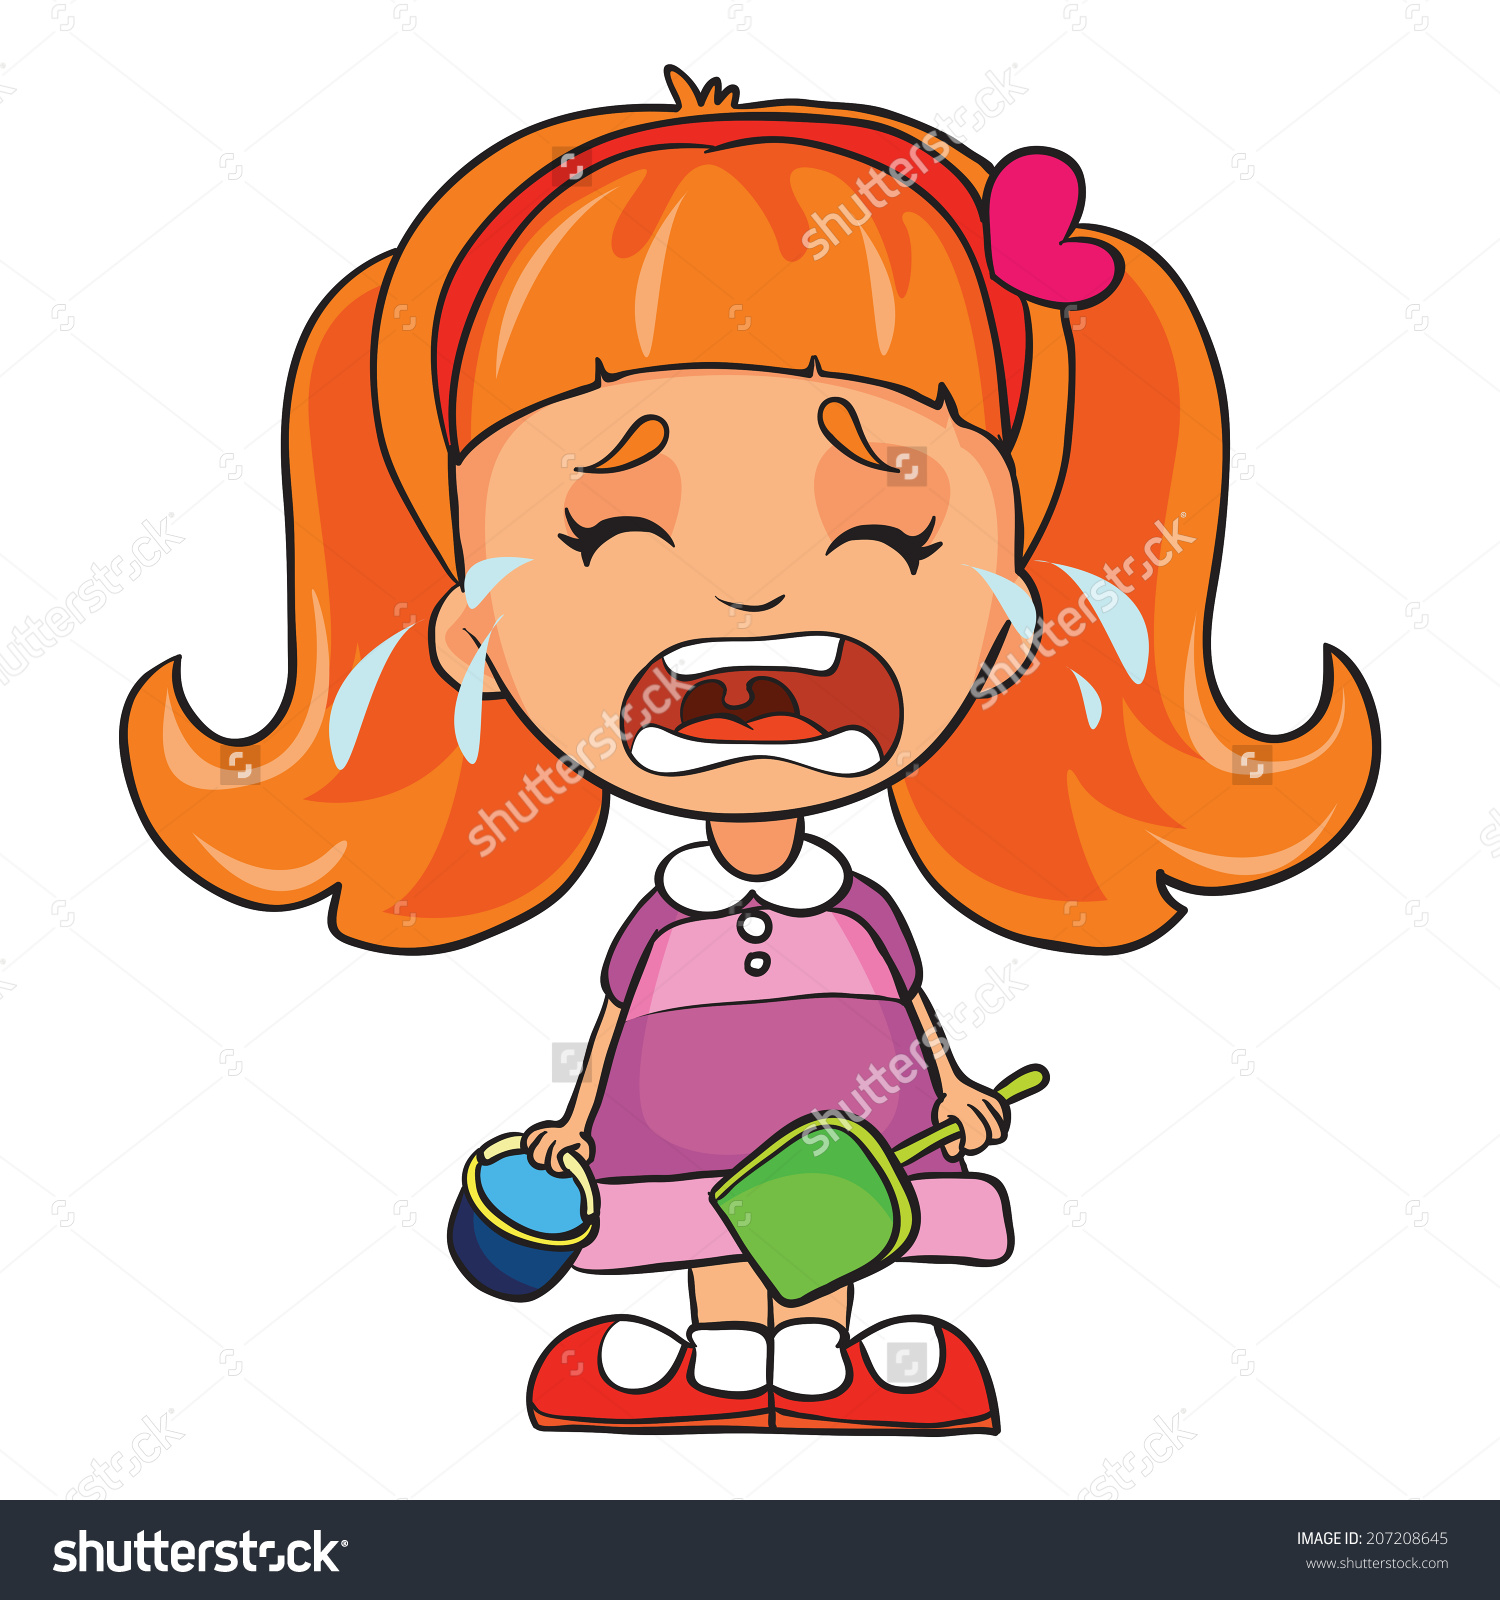 clipart of girl crying - photo #7